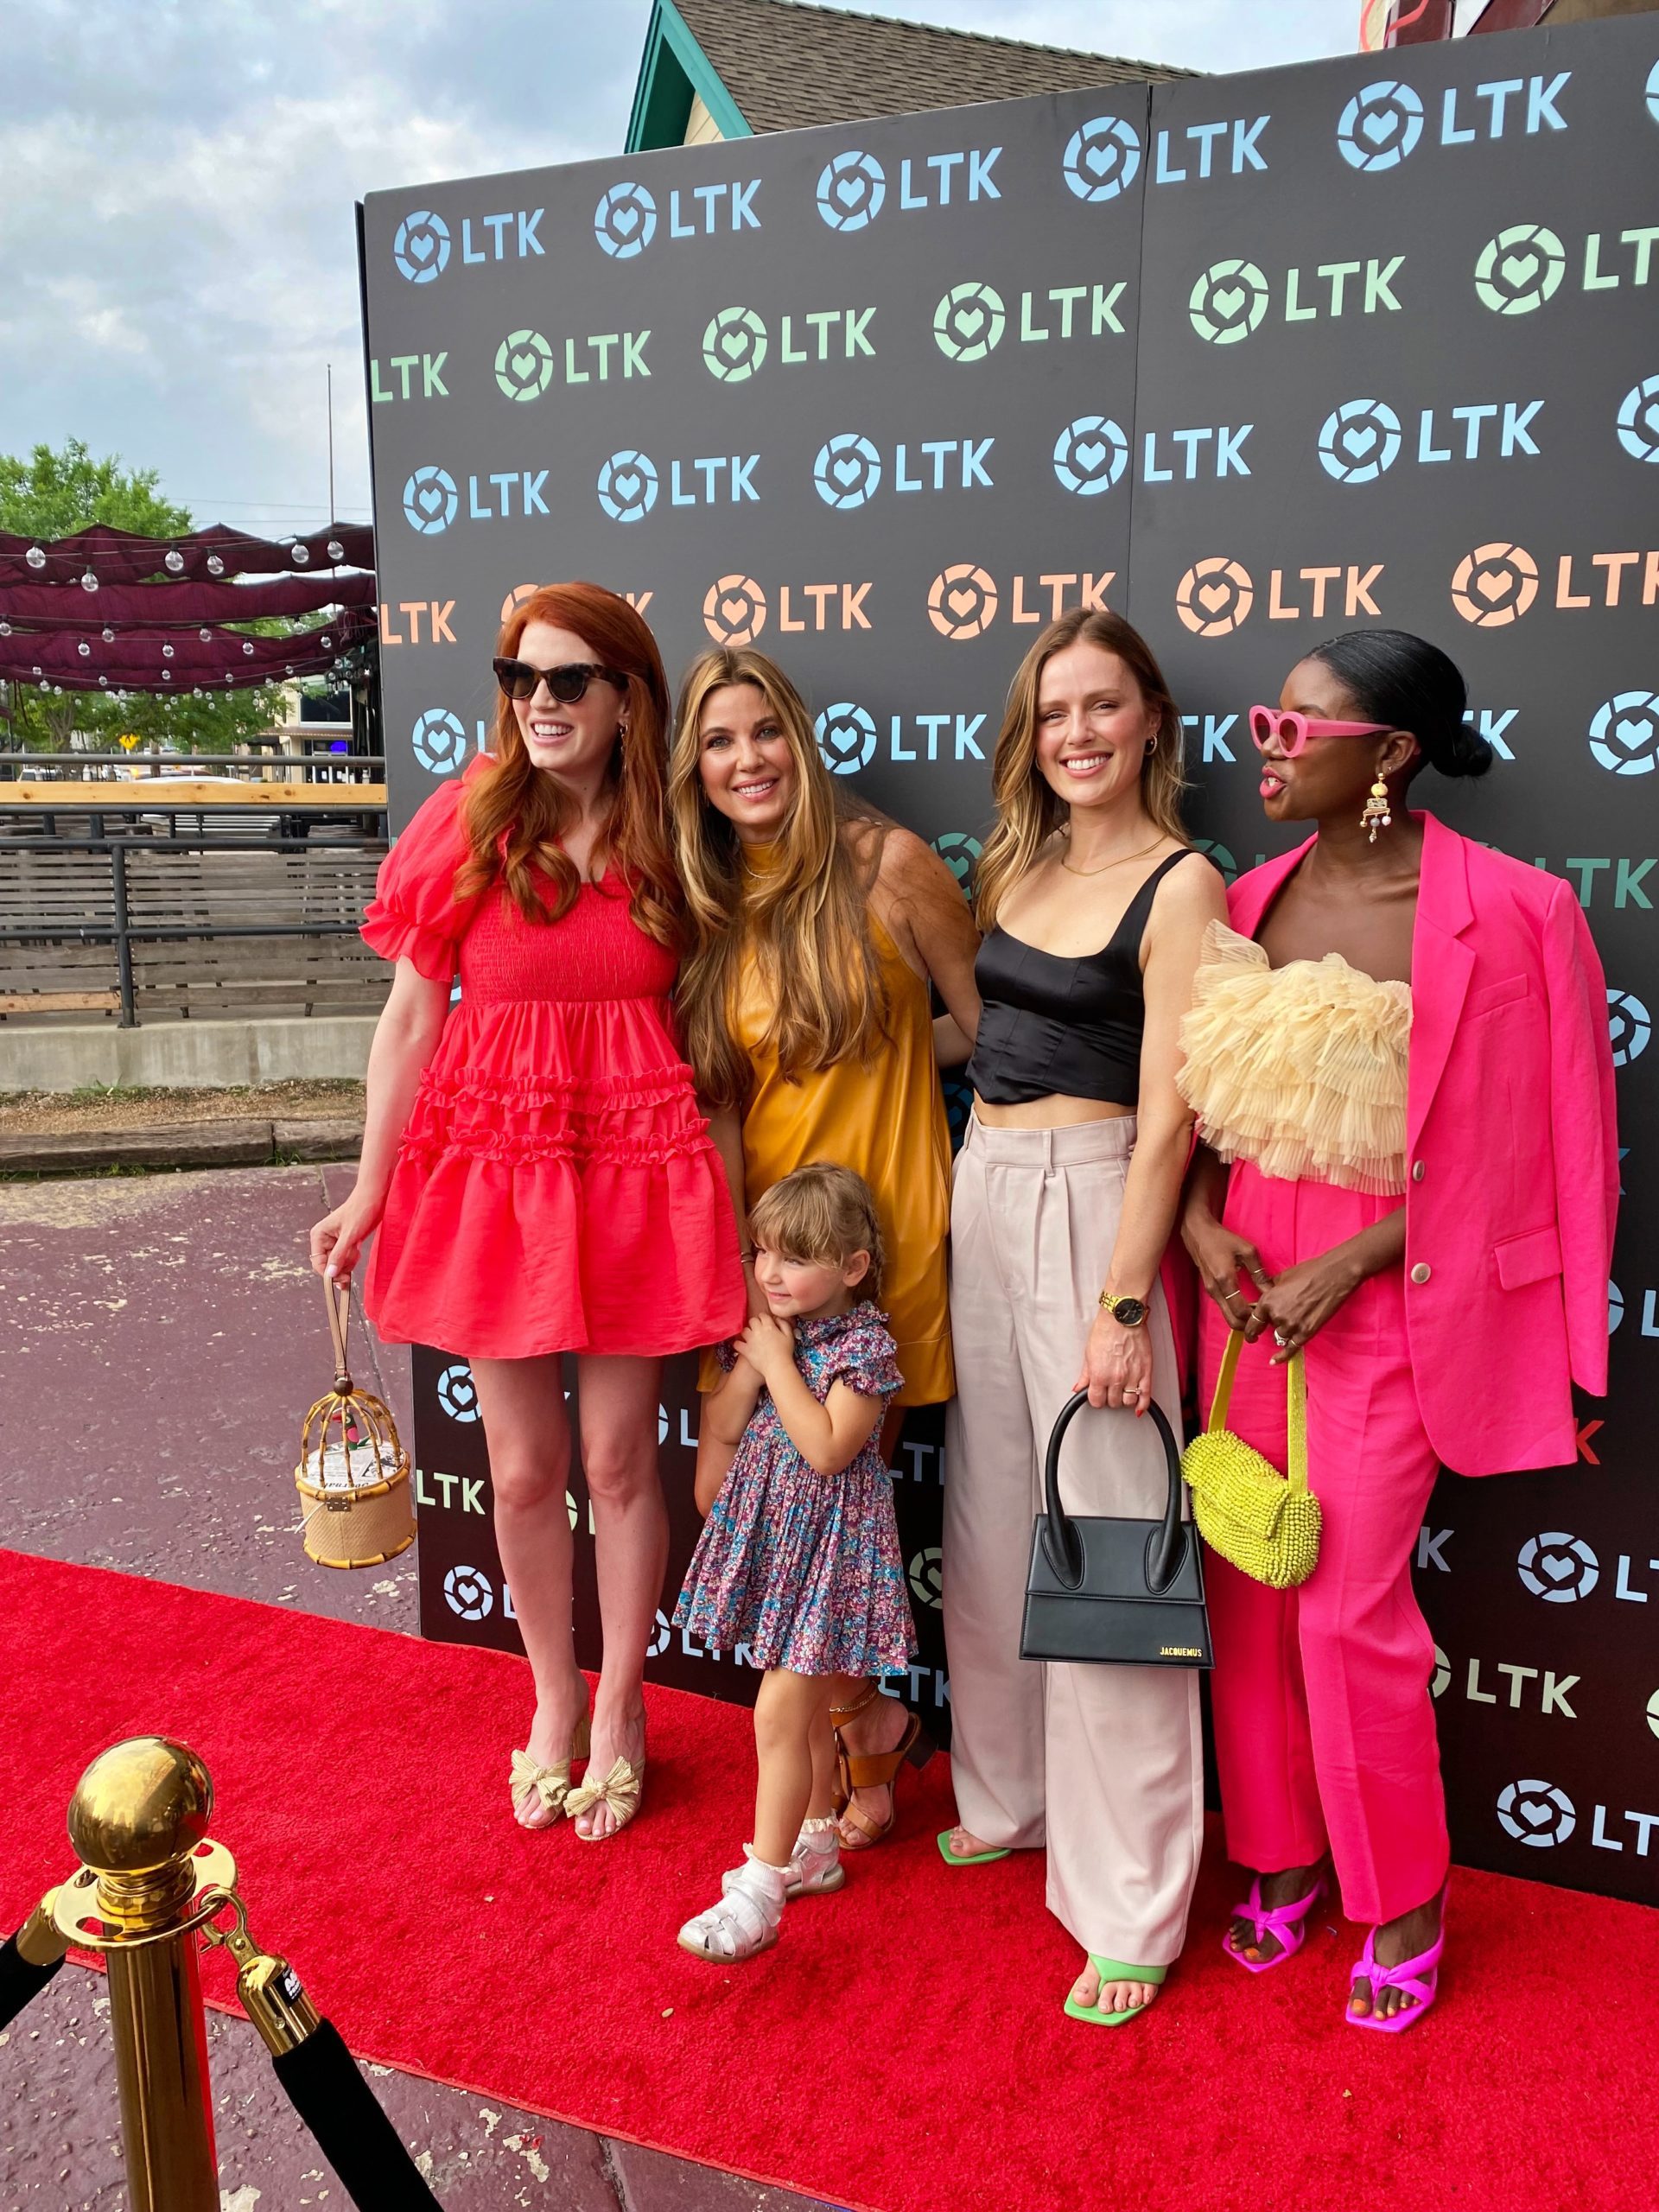 With LTK Founder Amber Venz Box, Joey Elle, Charlotte B. and Brandy G. on the red carpet